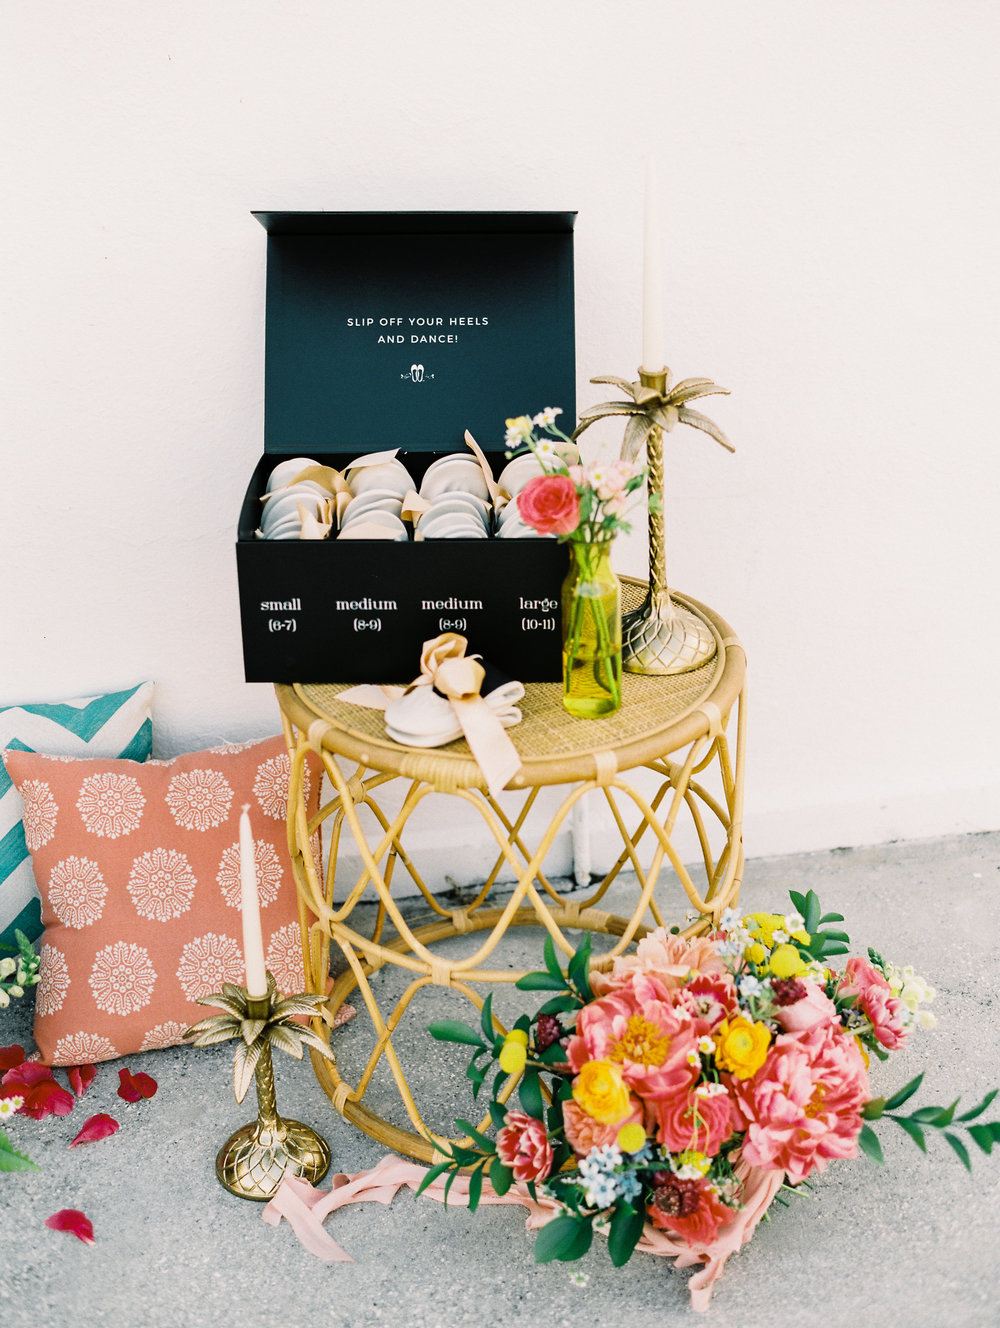 7 Wedding Favor and Decor Ideas with M&M'S + 25% Off Code! ⋆ Ruffled